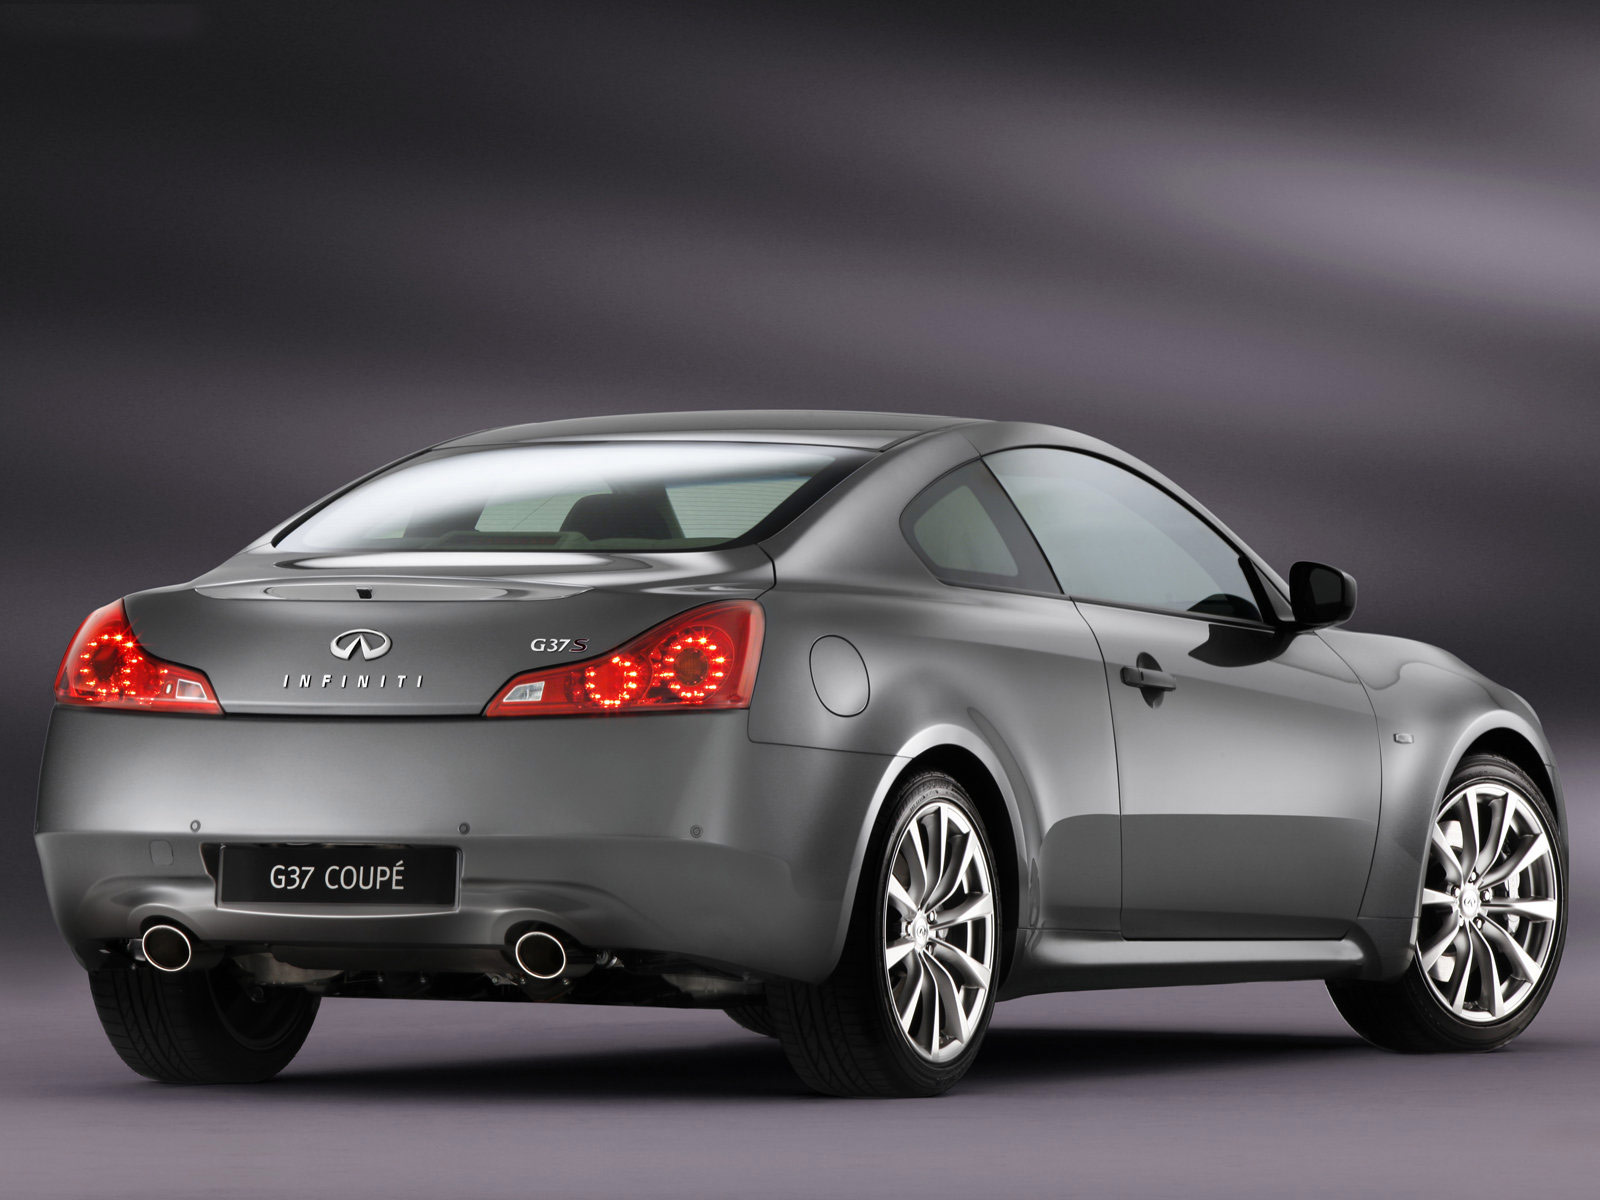 INFINITI G37 Coupe Car pictures 2008 | accident lawyers info